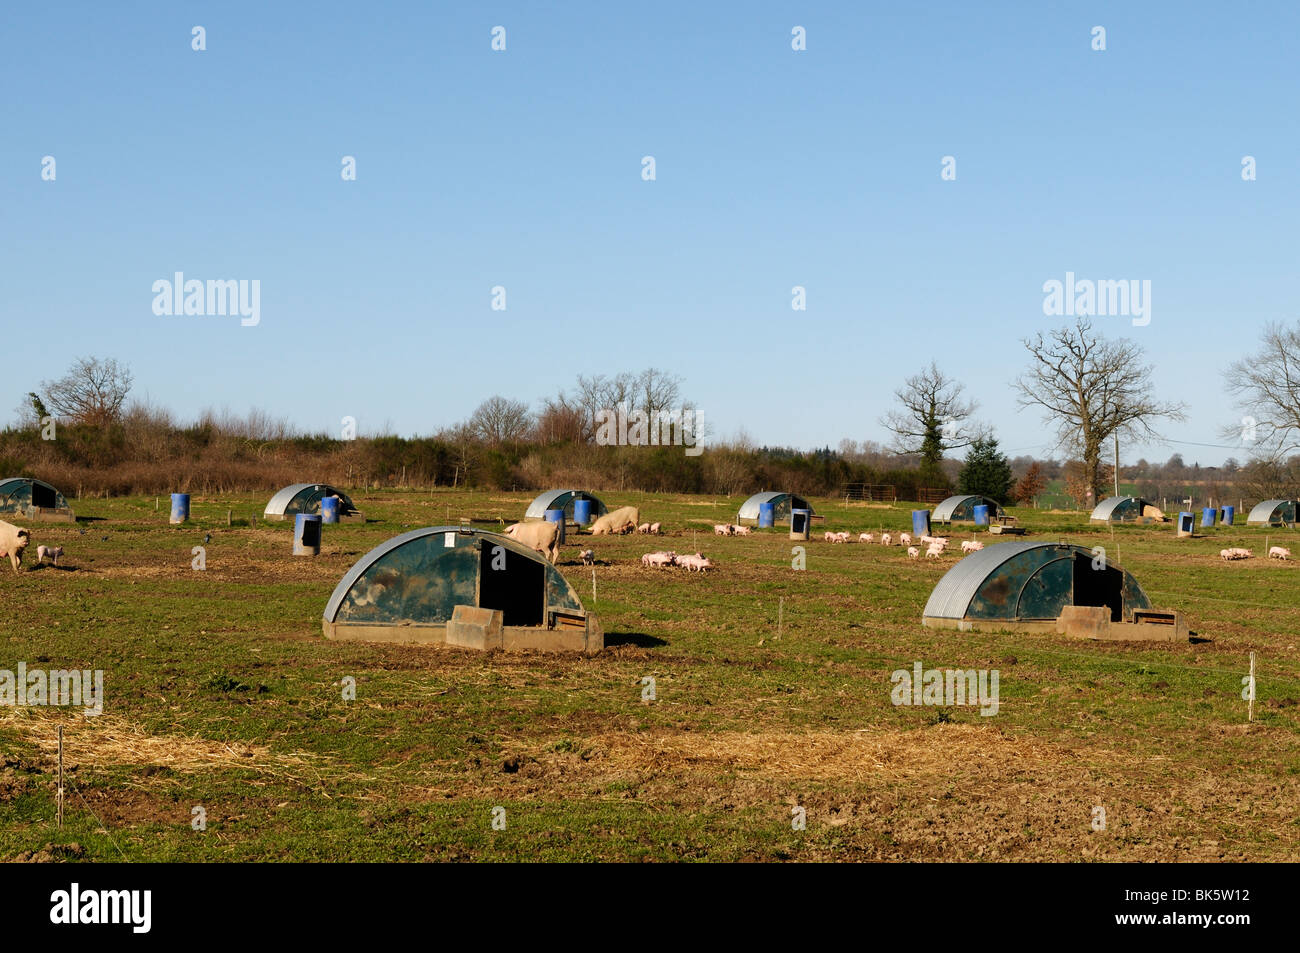 Stock photo of a free range pig farm in France. Stock Photo